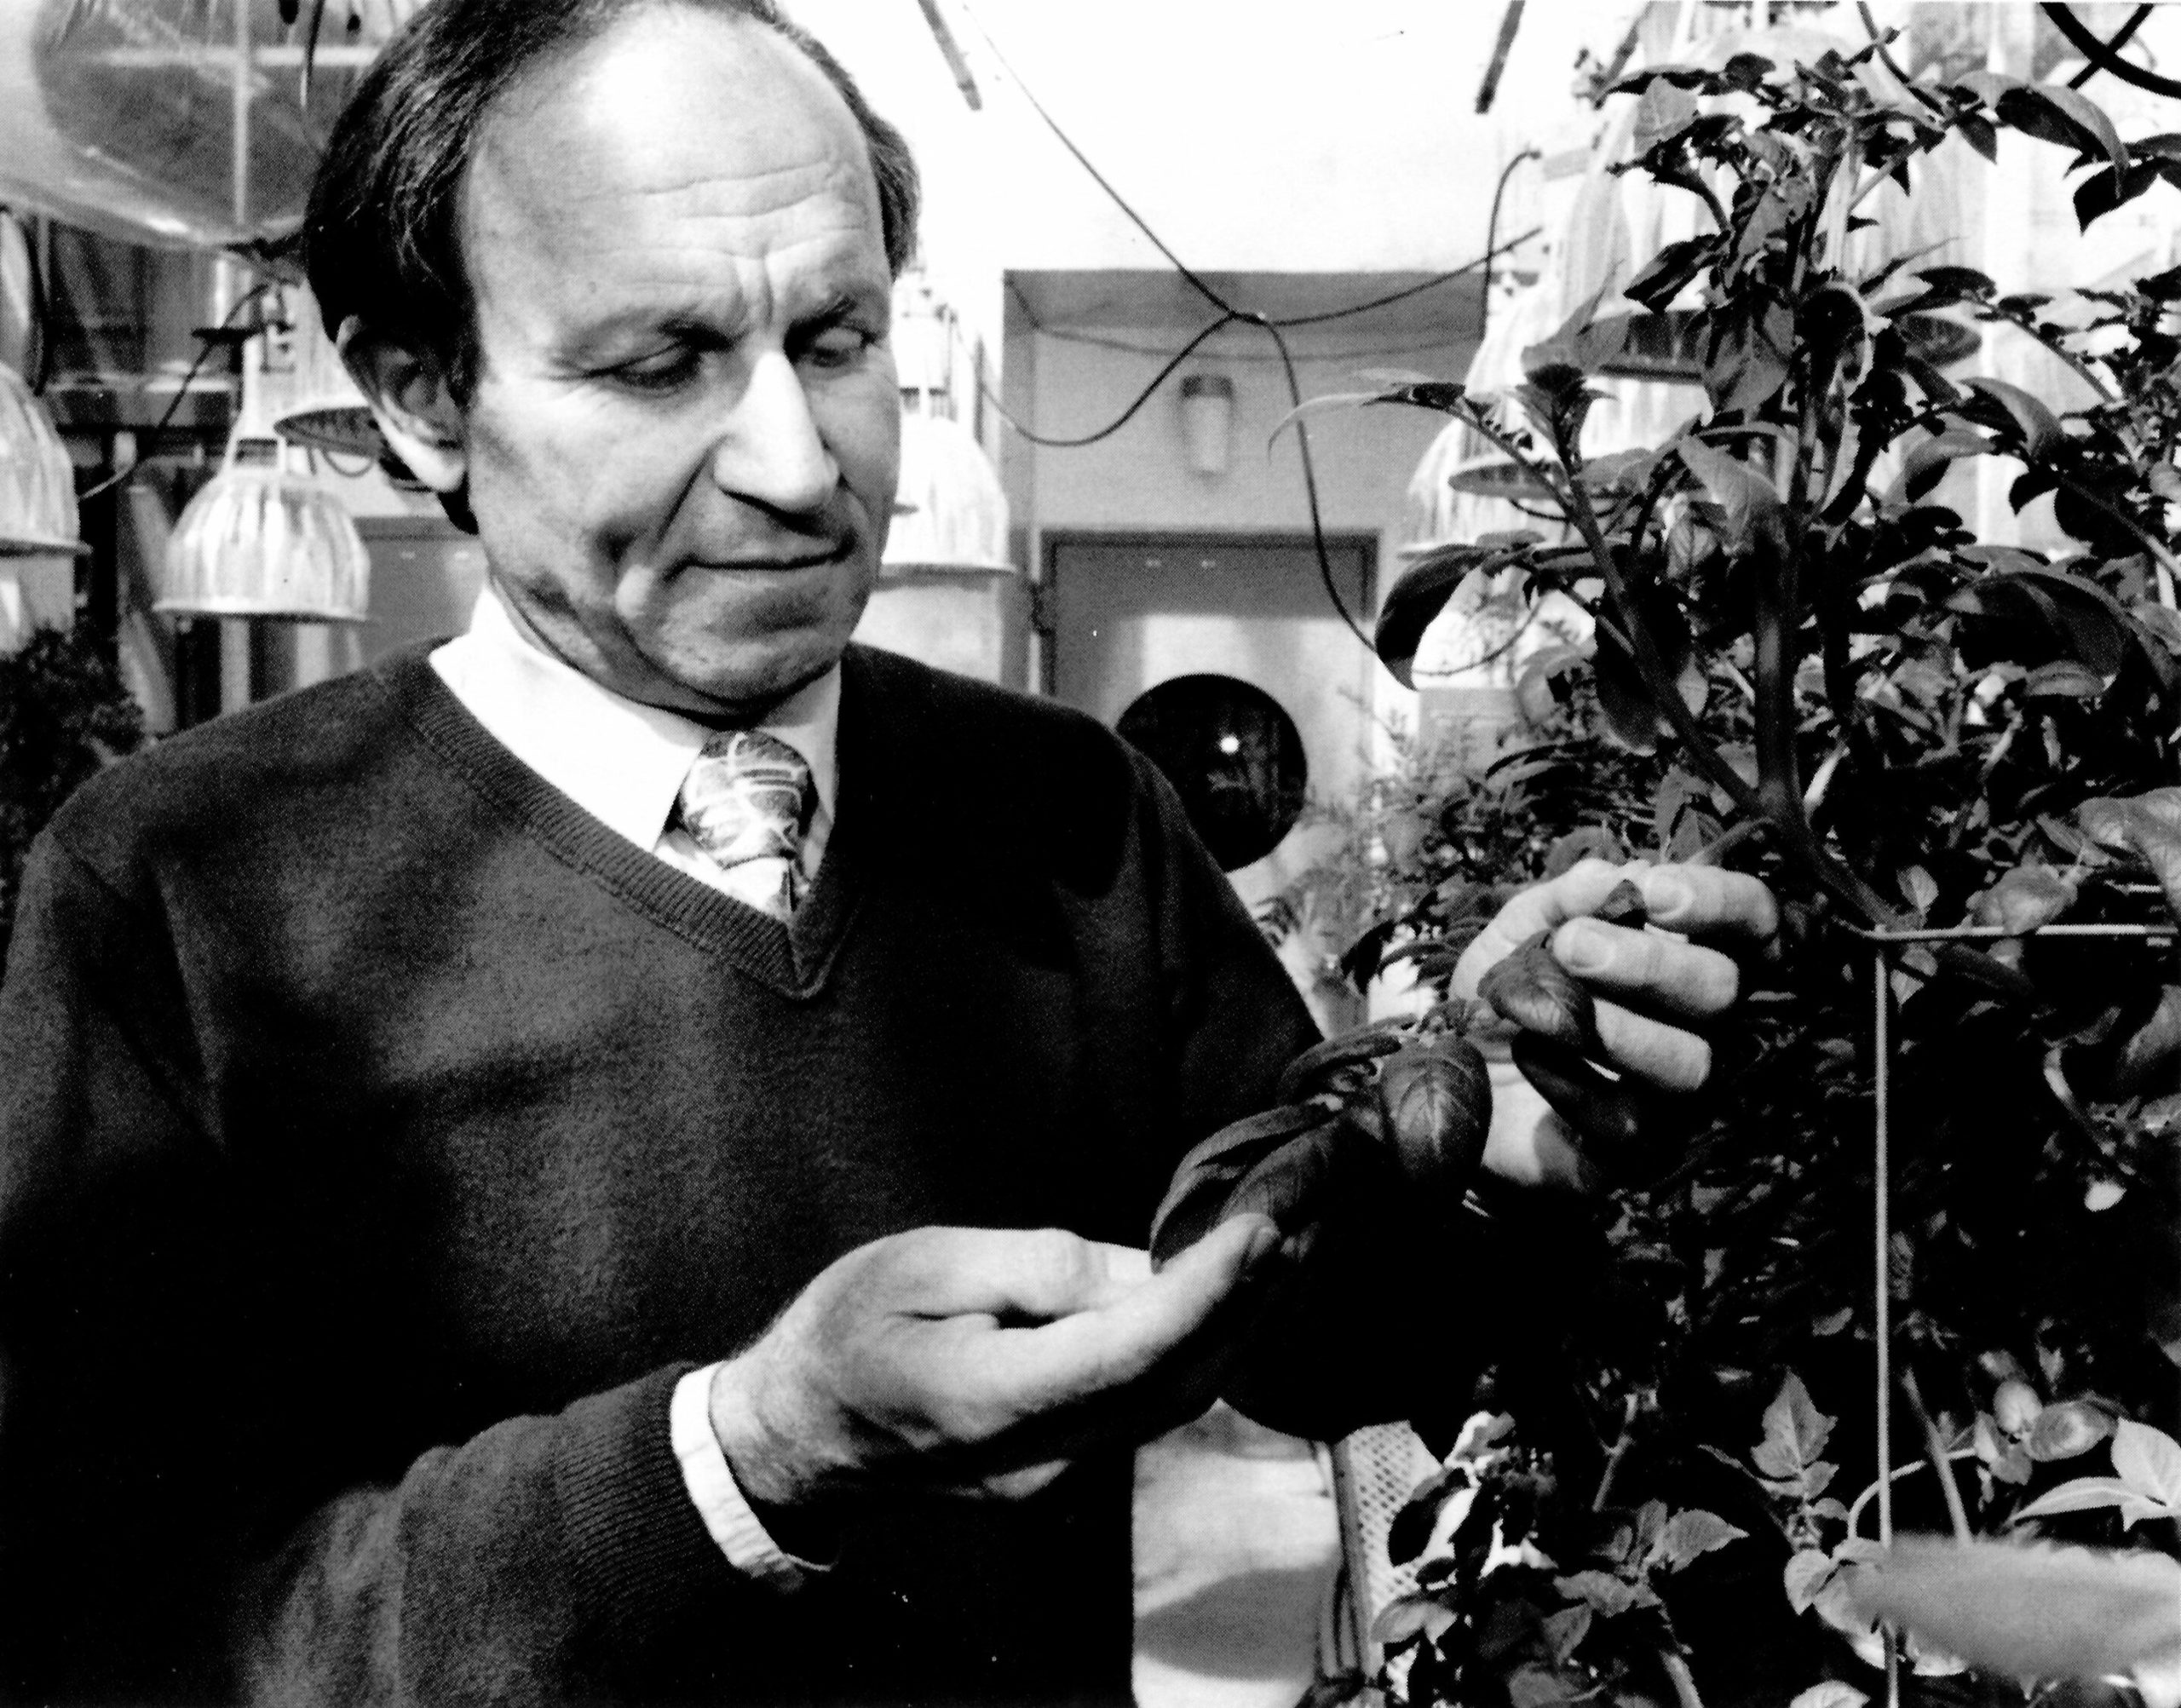 Jay Jacobson looks at leaves on a plant in a greenhouse.